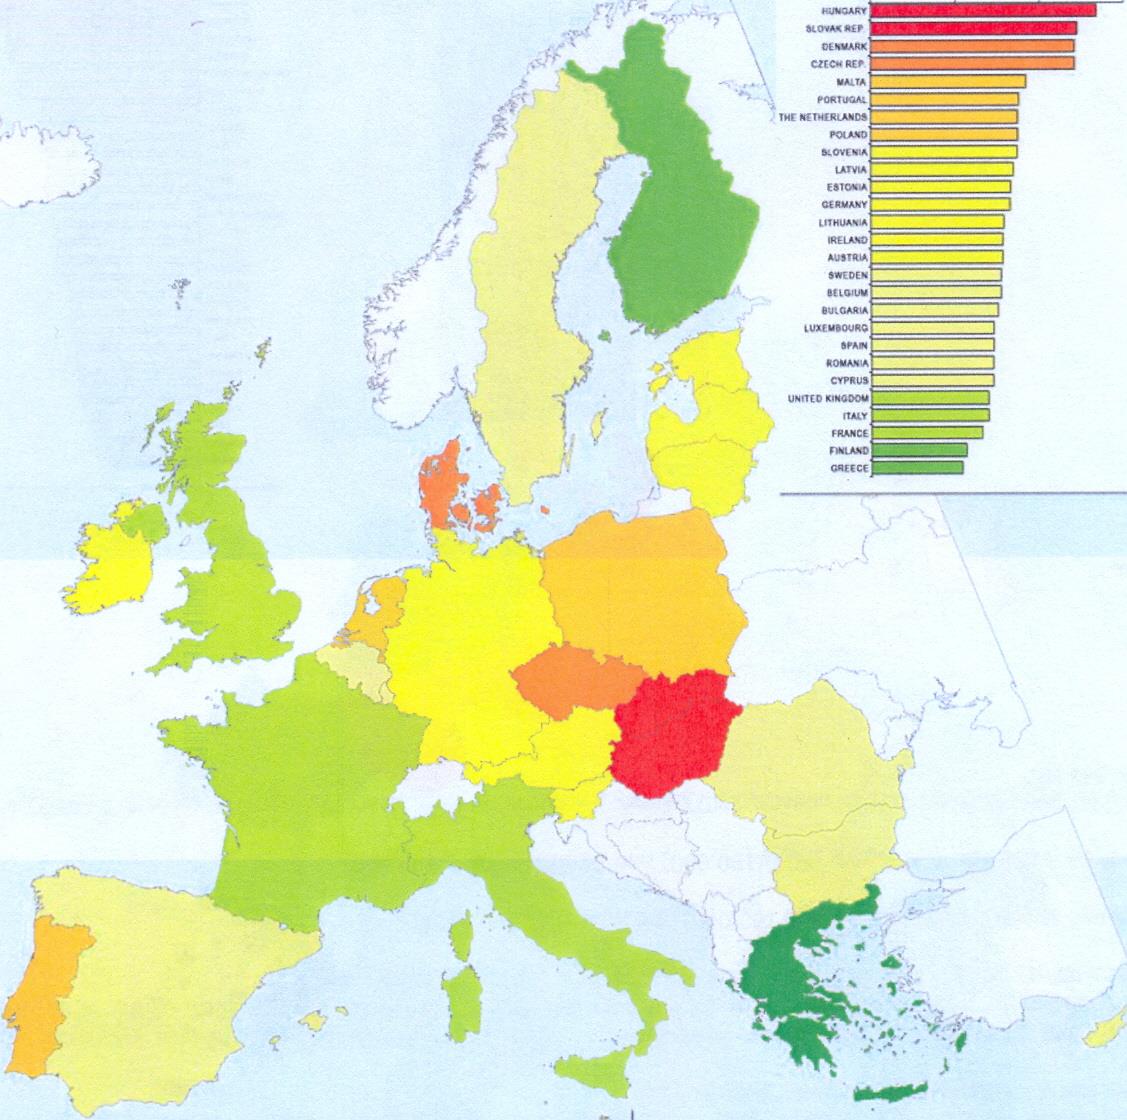 Colorectal cancer mortality in women in the EU Member